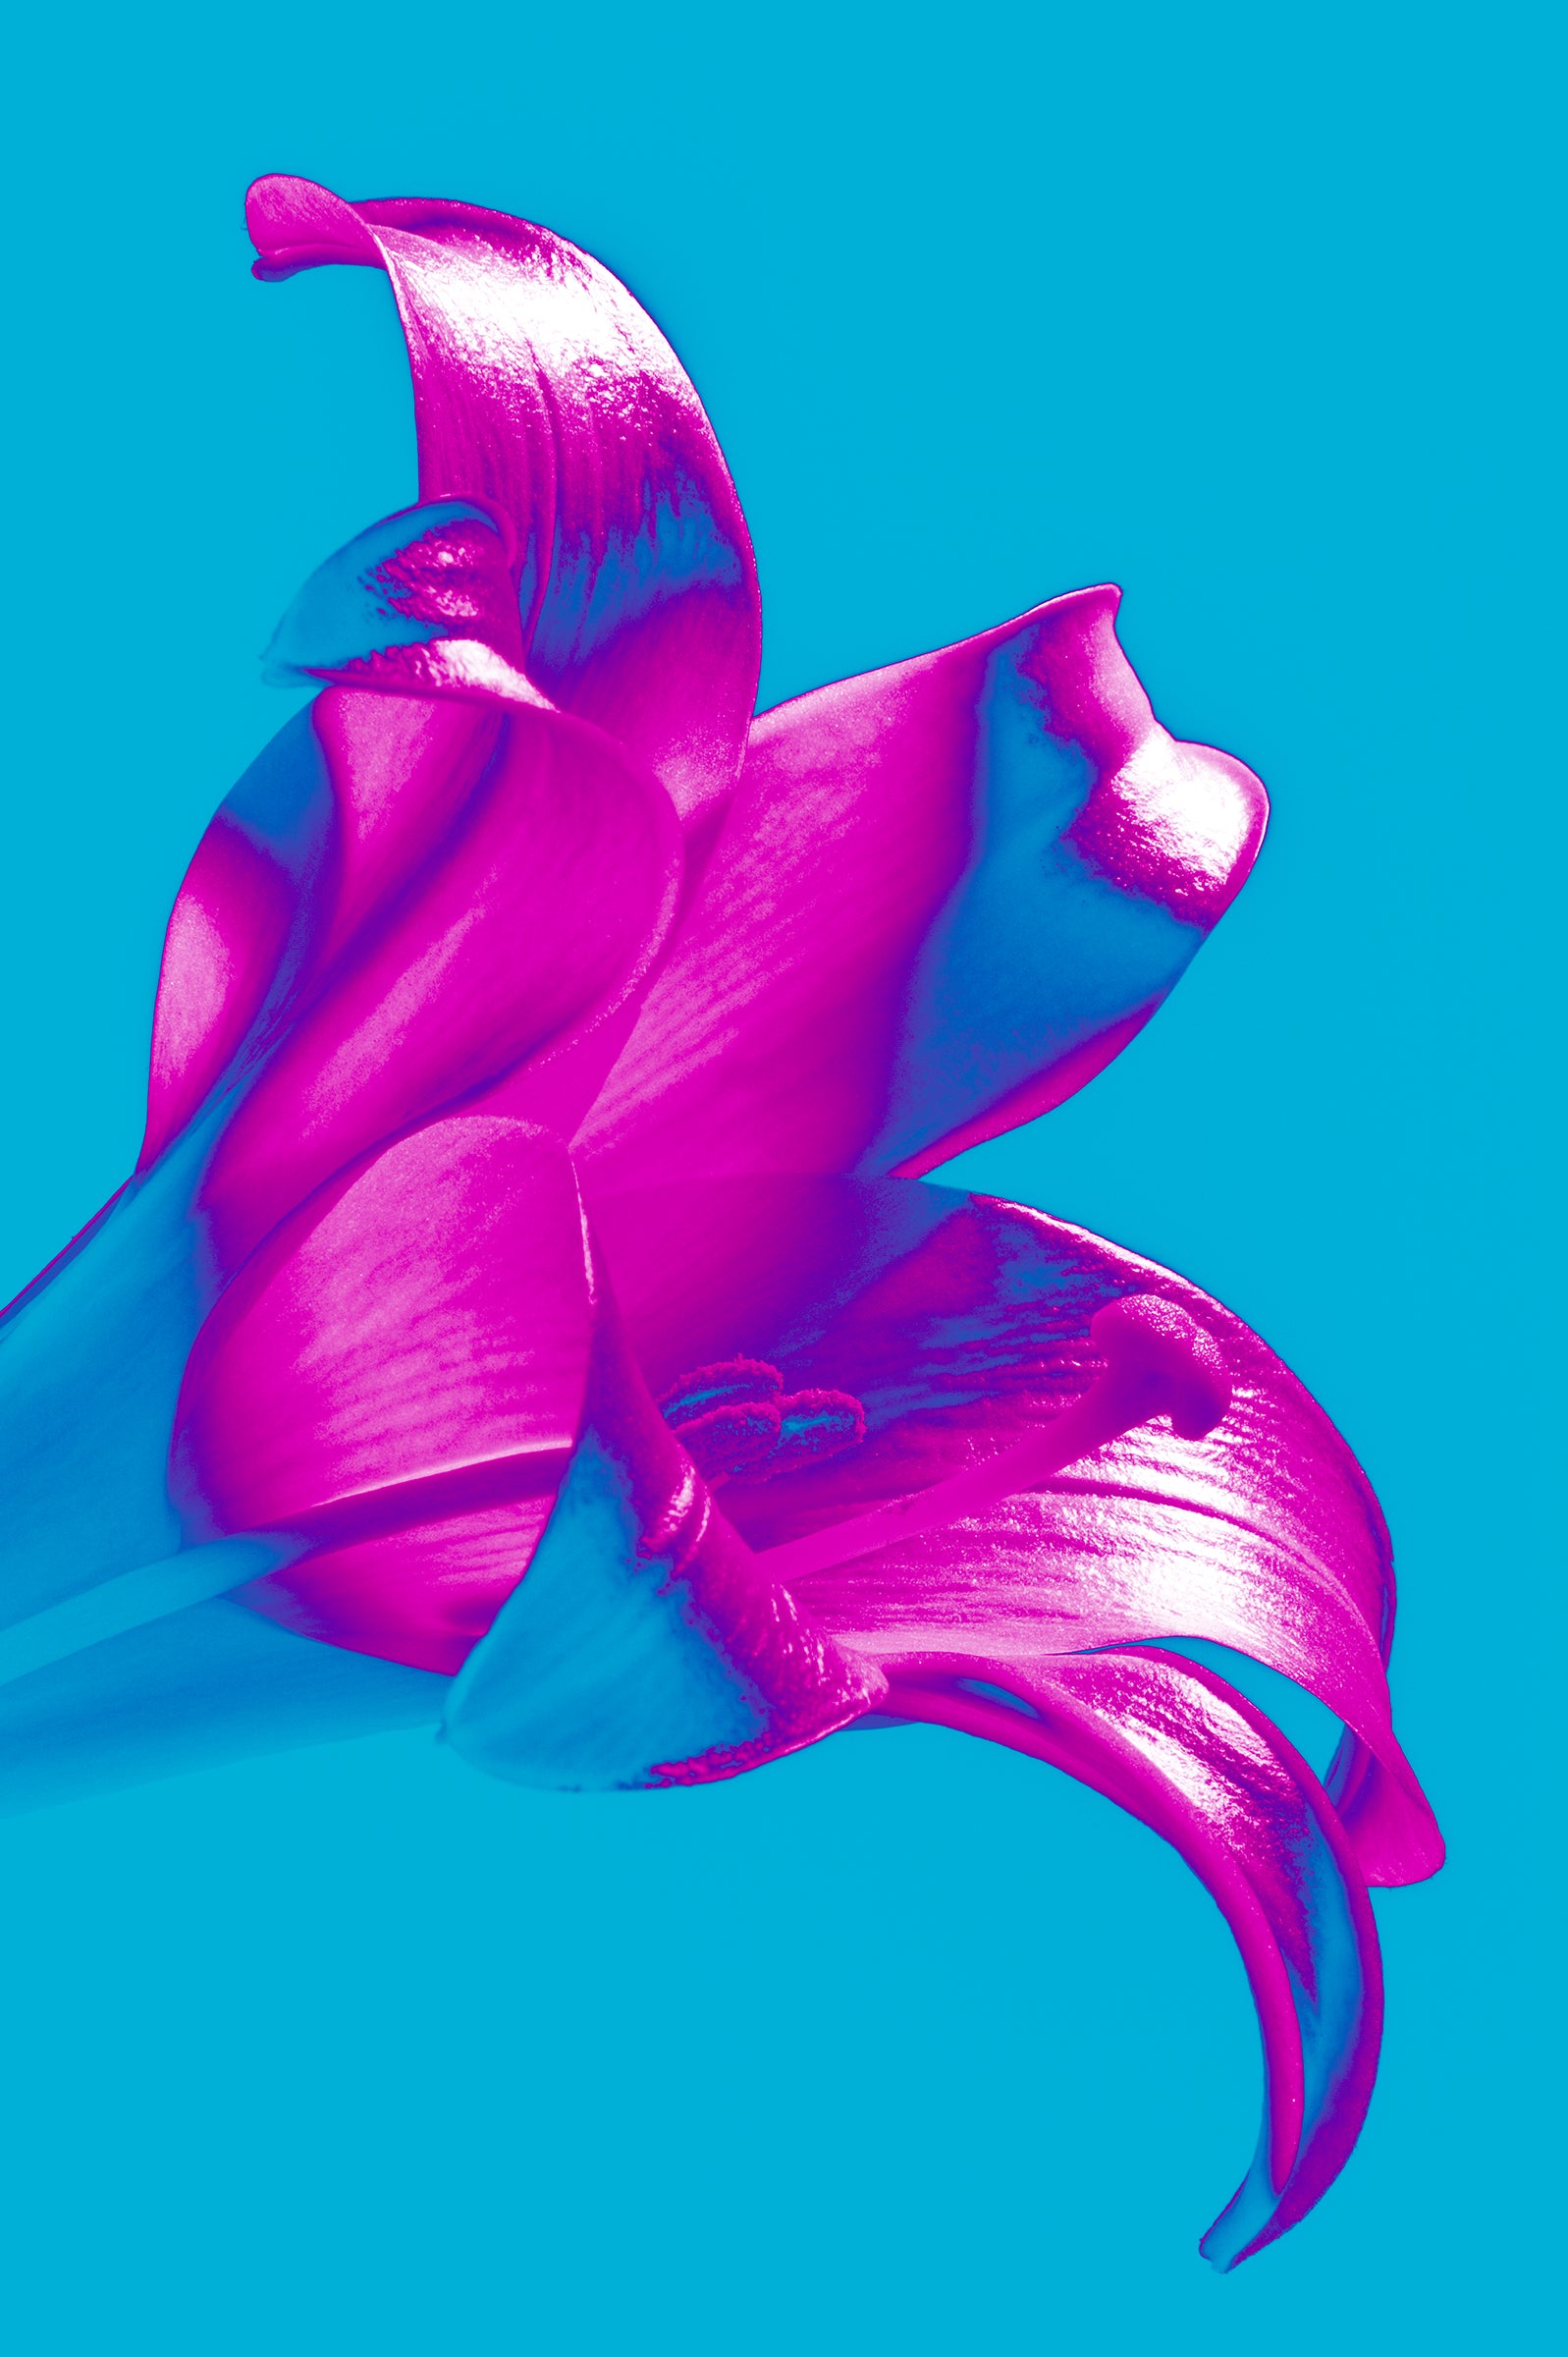 bright pop art photo of pink lily on blue background